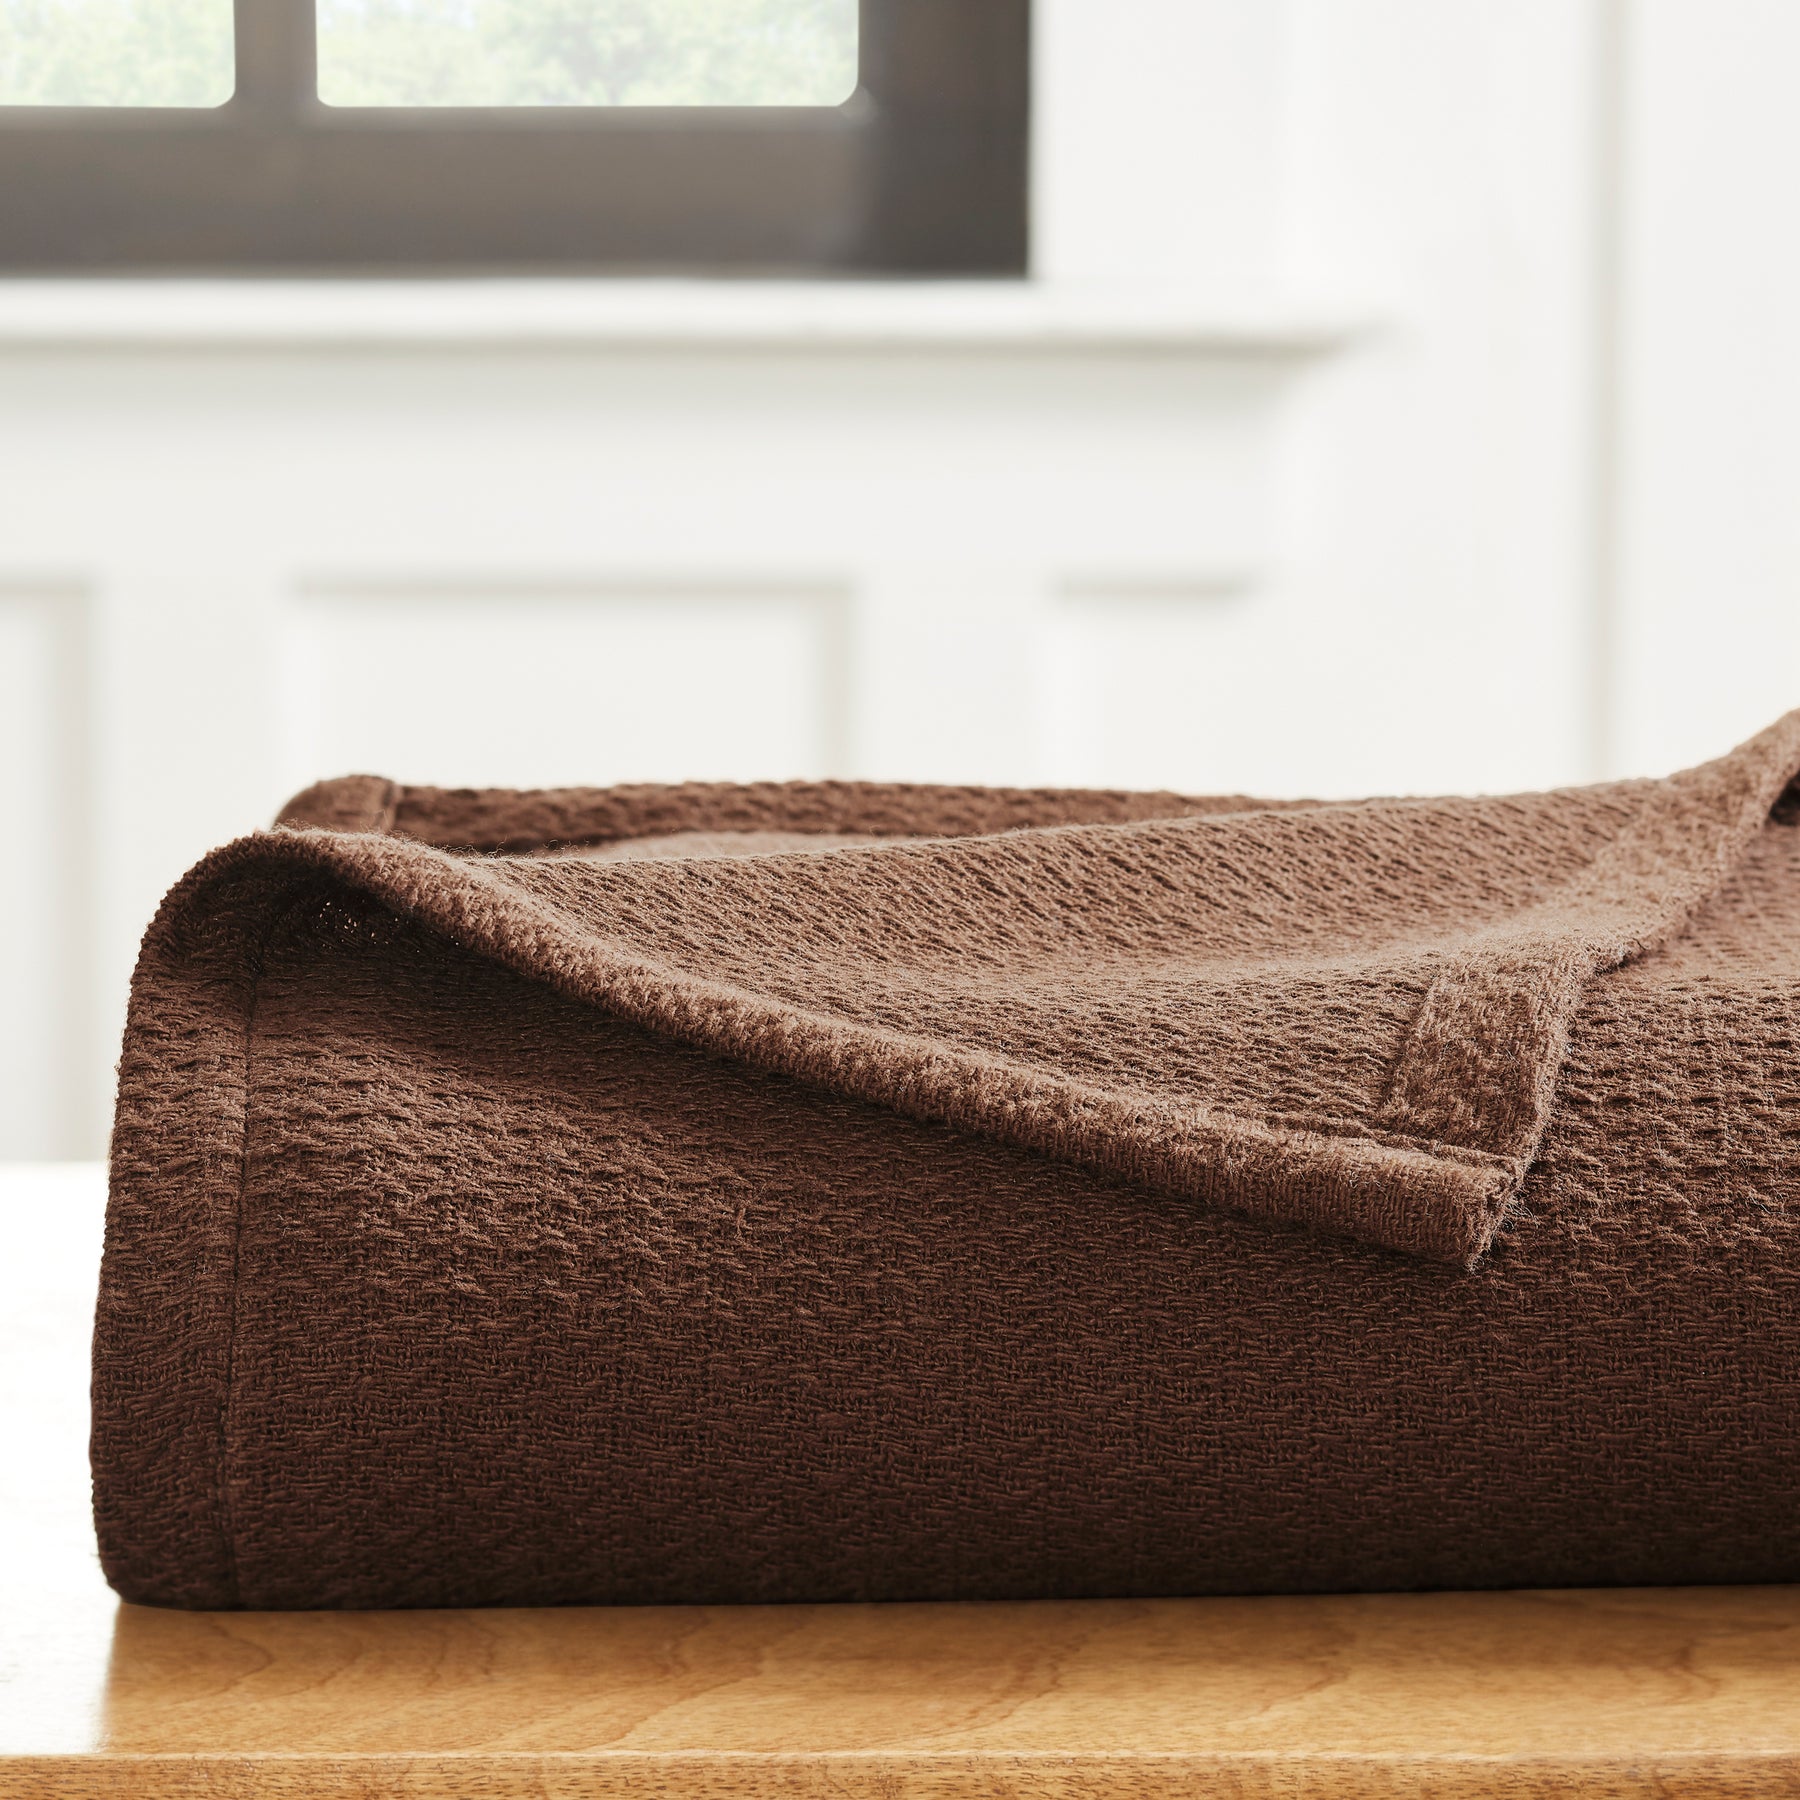 Waffle Weave Honeycomb Knit Soft Solid Textured Cotton Blanket - Chocolate